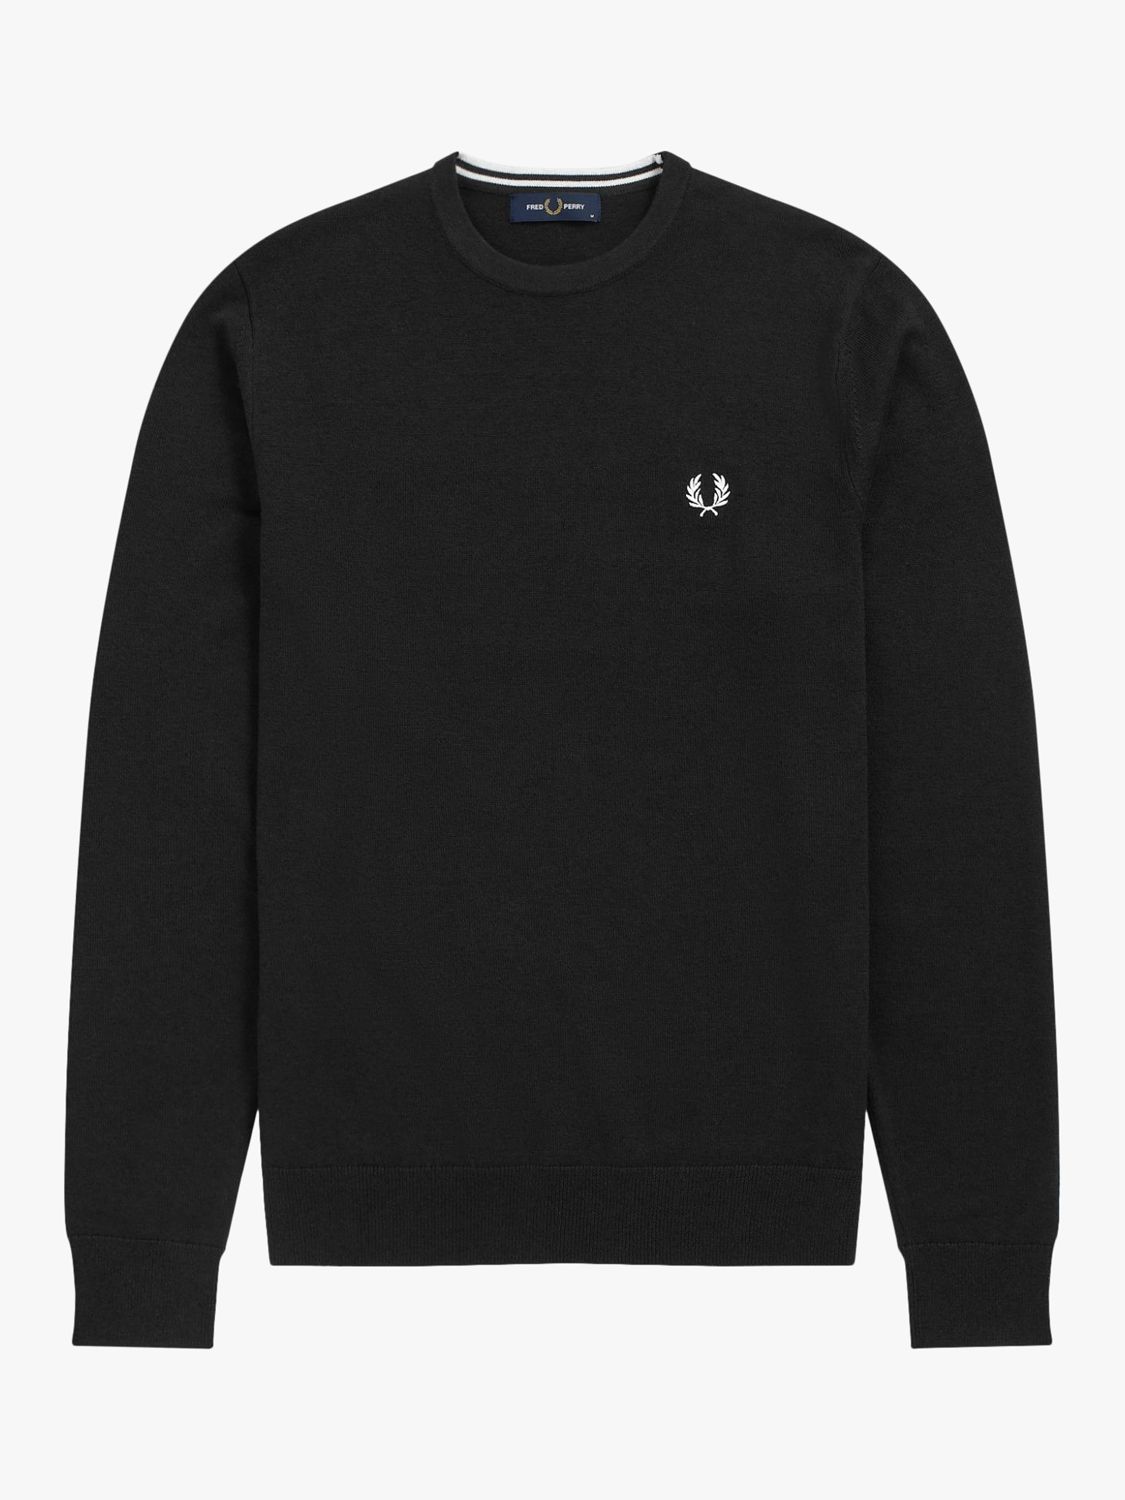 Fred Perry Classic Crew Neck Knit Jumper, Black at John Lewis & Partners